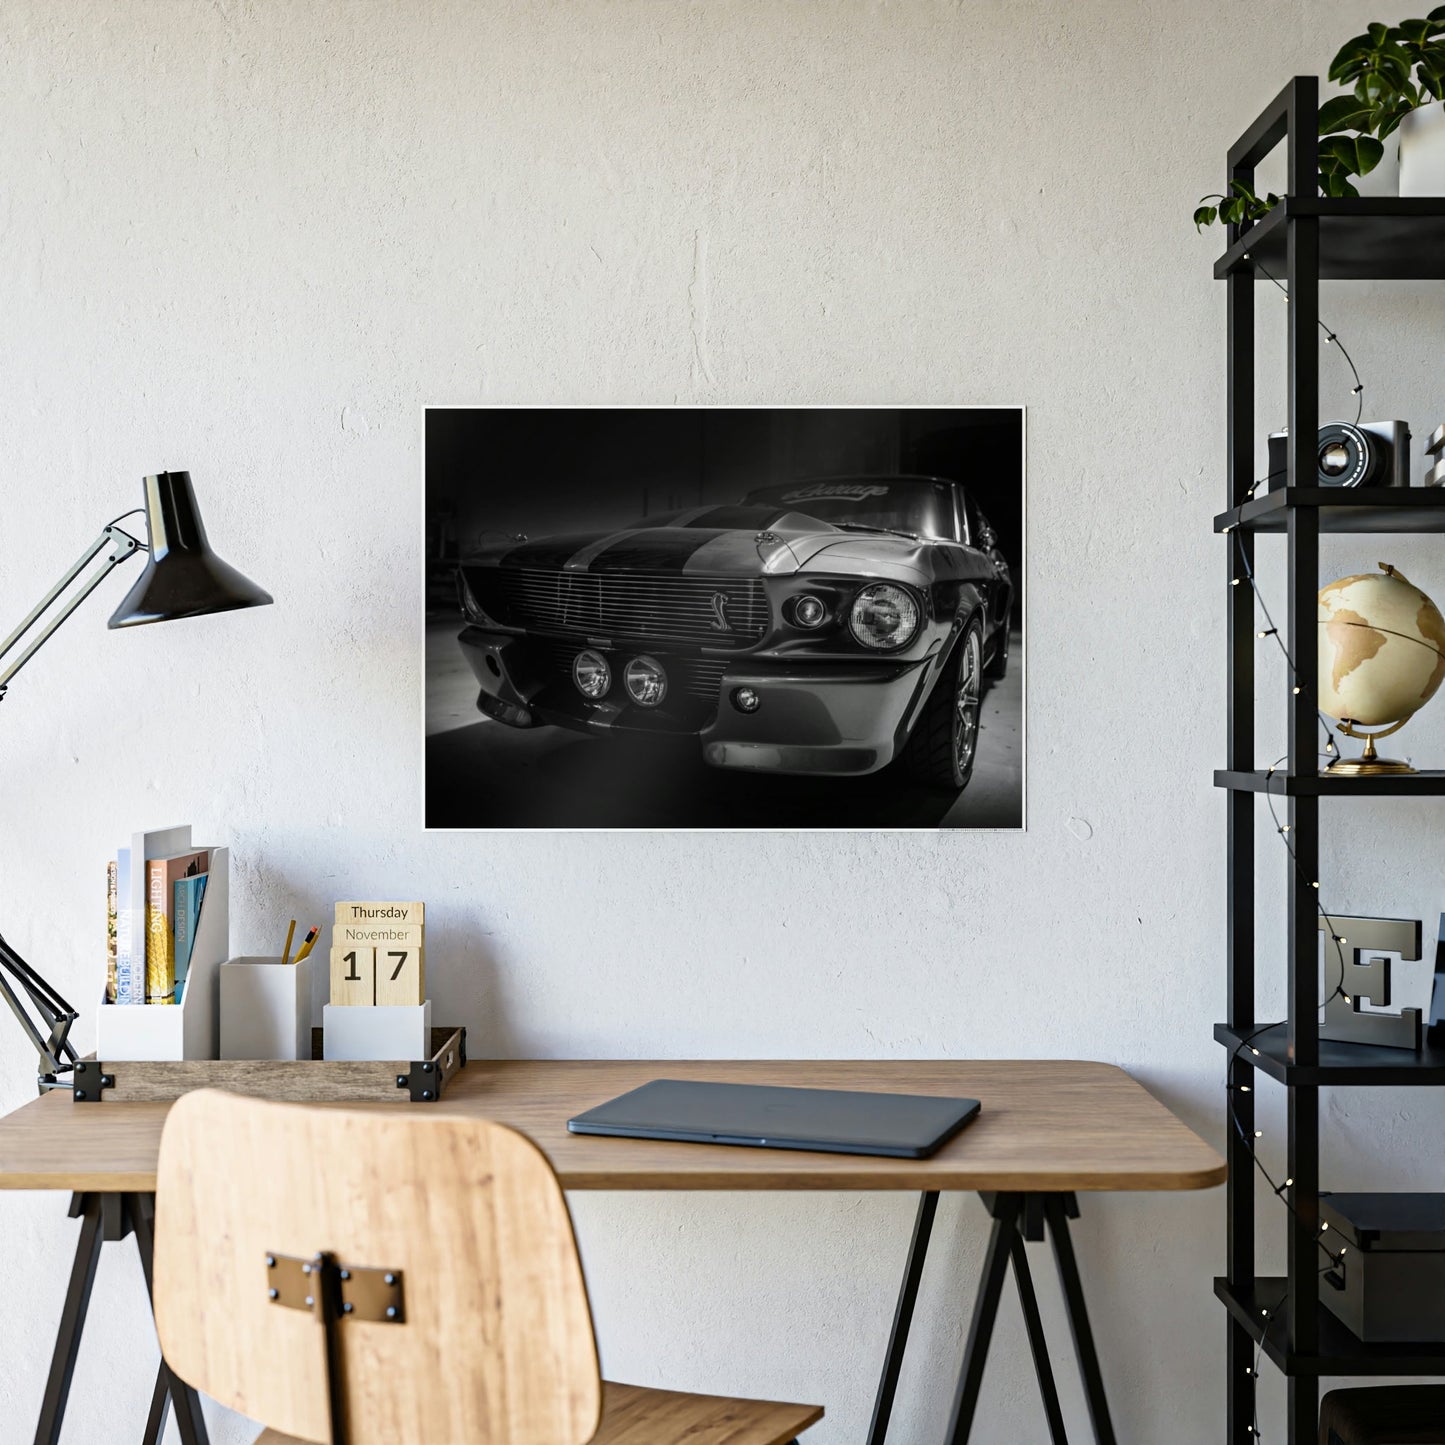 Art of Velocity: Mustang Sports Car Art on Canvas for Auto Enthusiasts